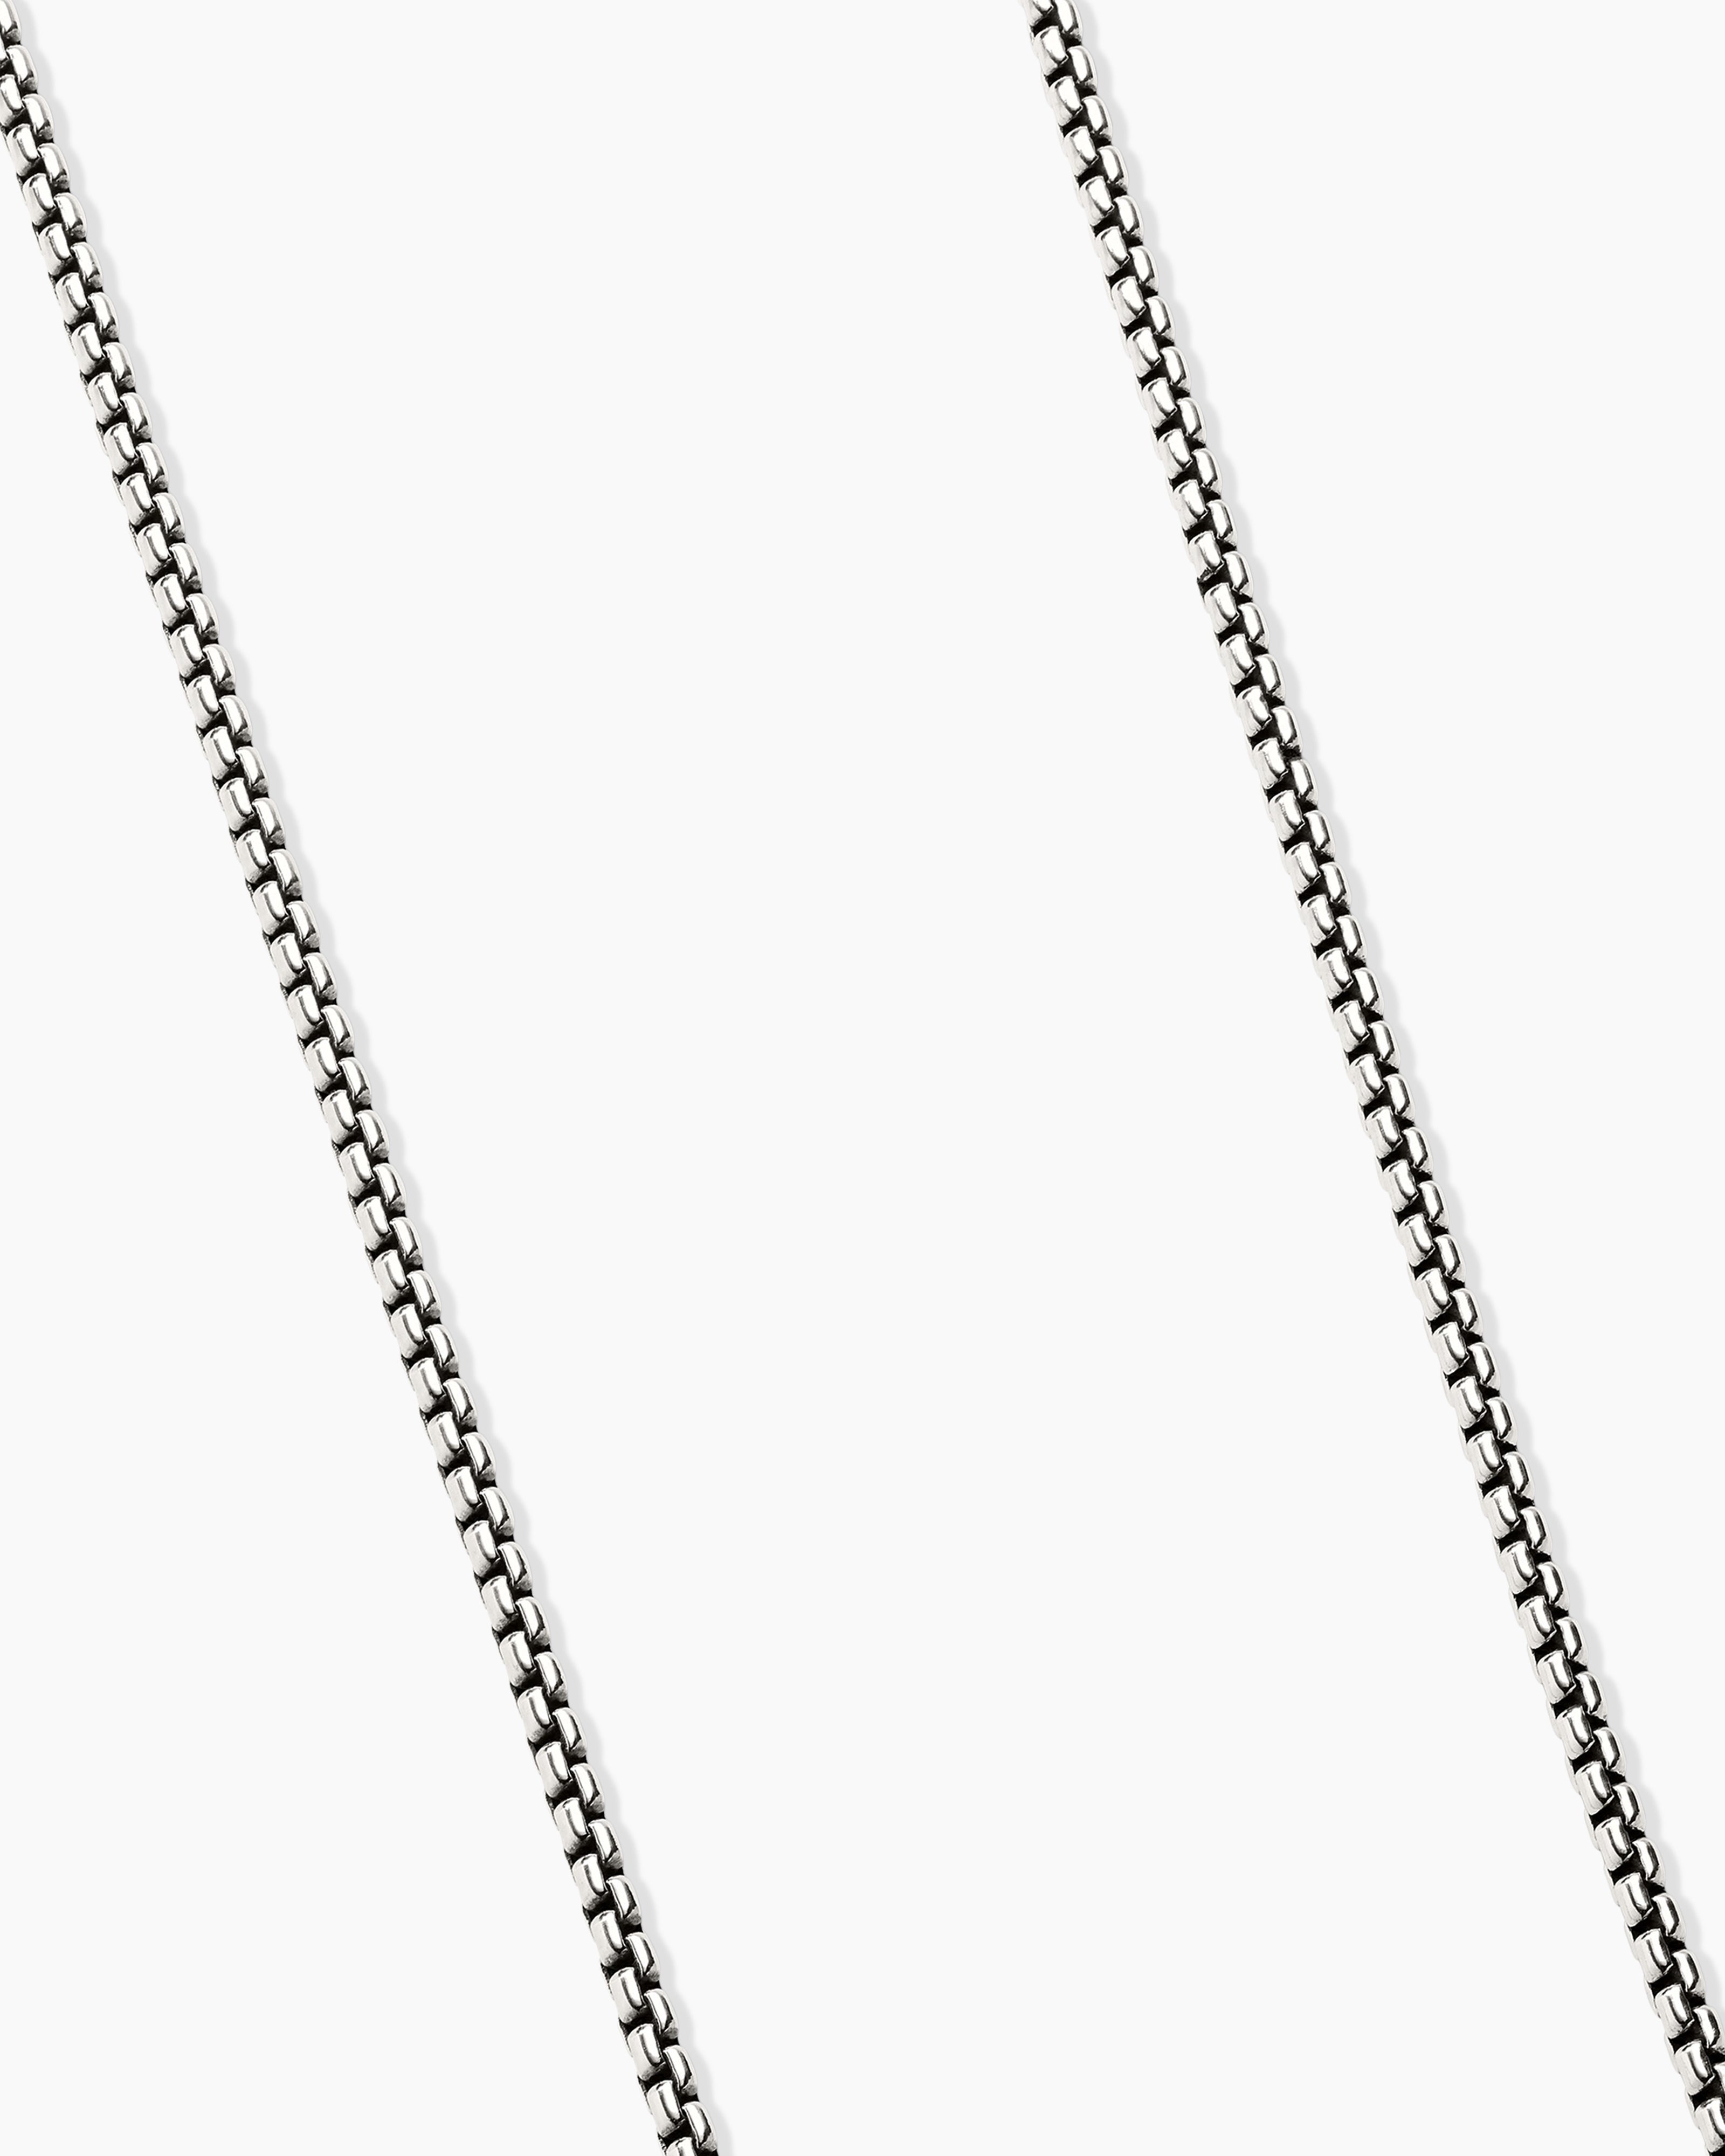 Top 8 Sterling Silver Chains To Wear With A Pendant